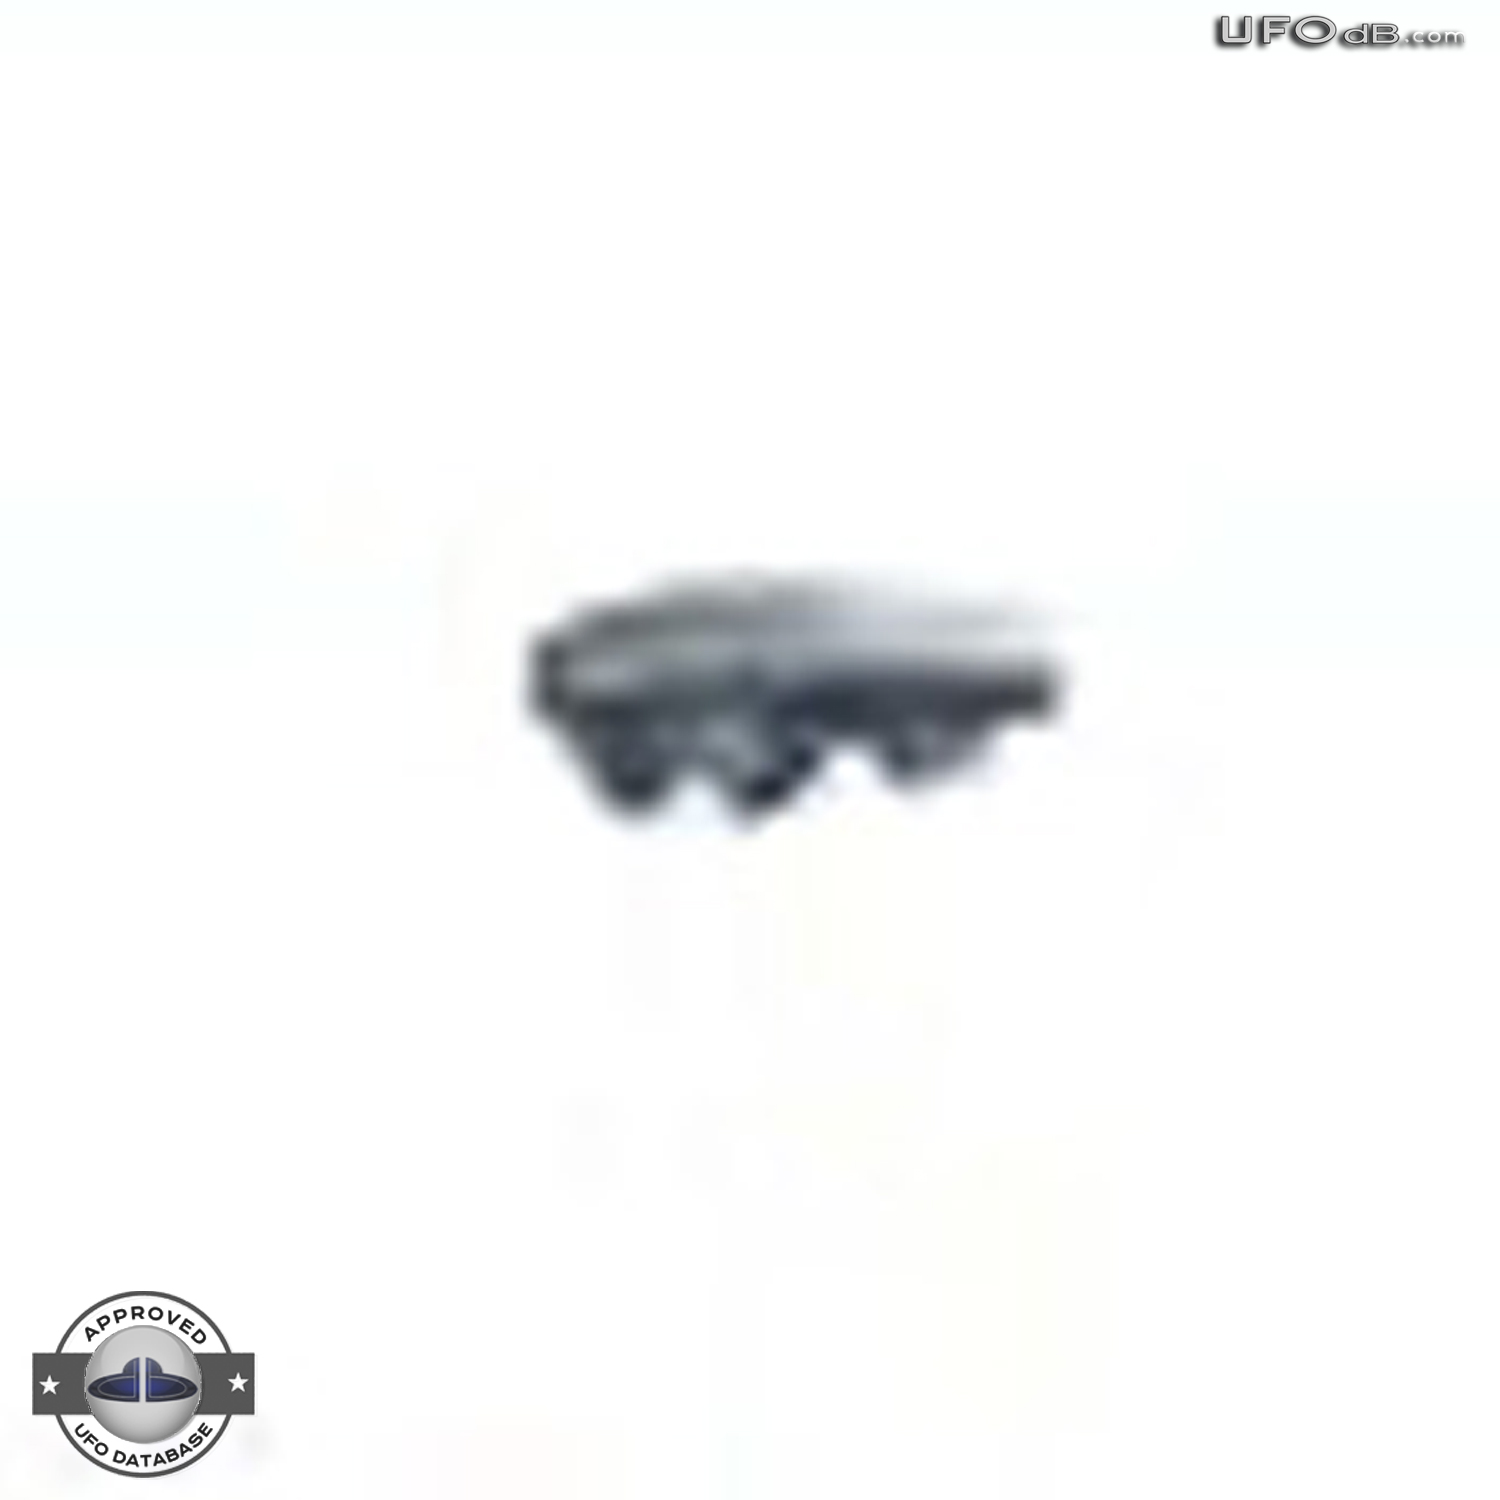 Very Strange UFO caught on picture over Rome | Italy | January 19 2011 UFO Picture #312-4